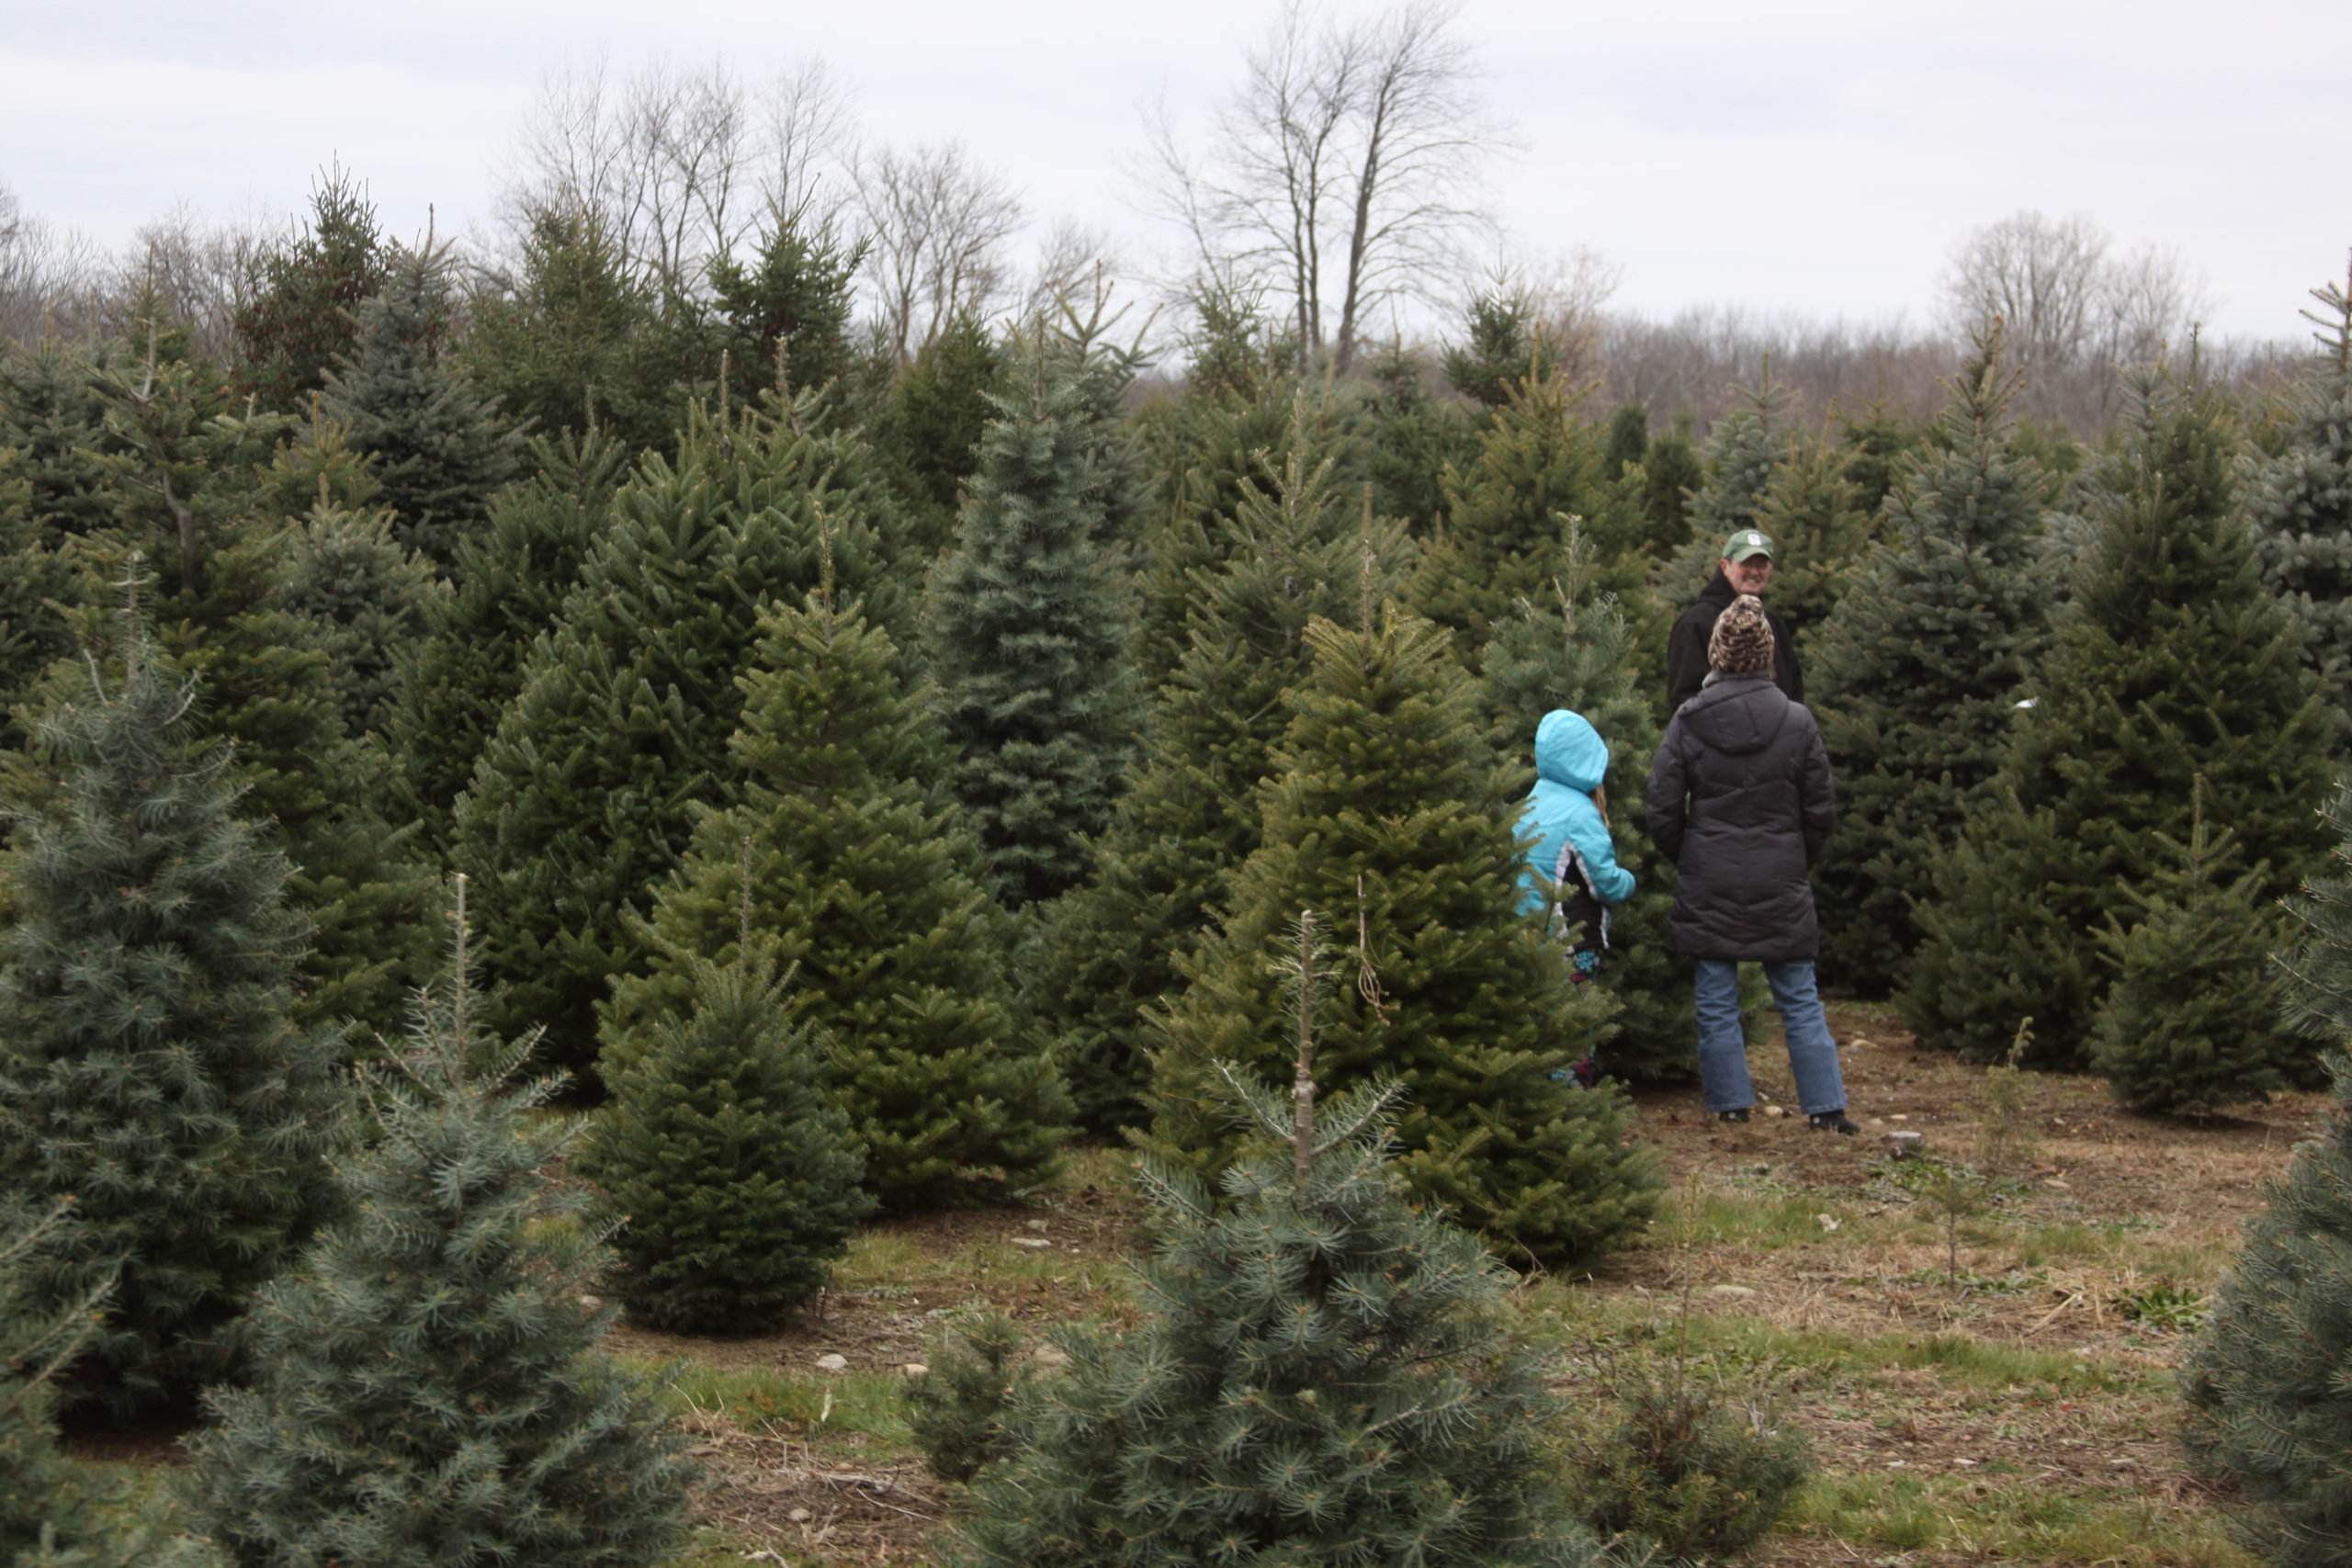 Start A Christmas Tree Farm By Following These 9 Steps: